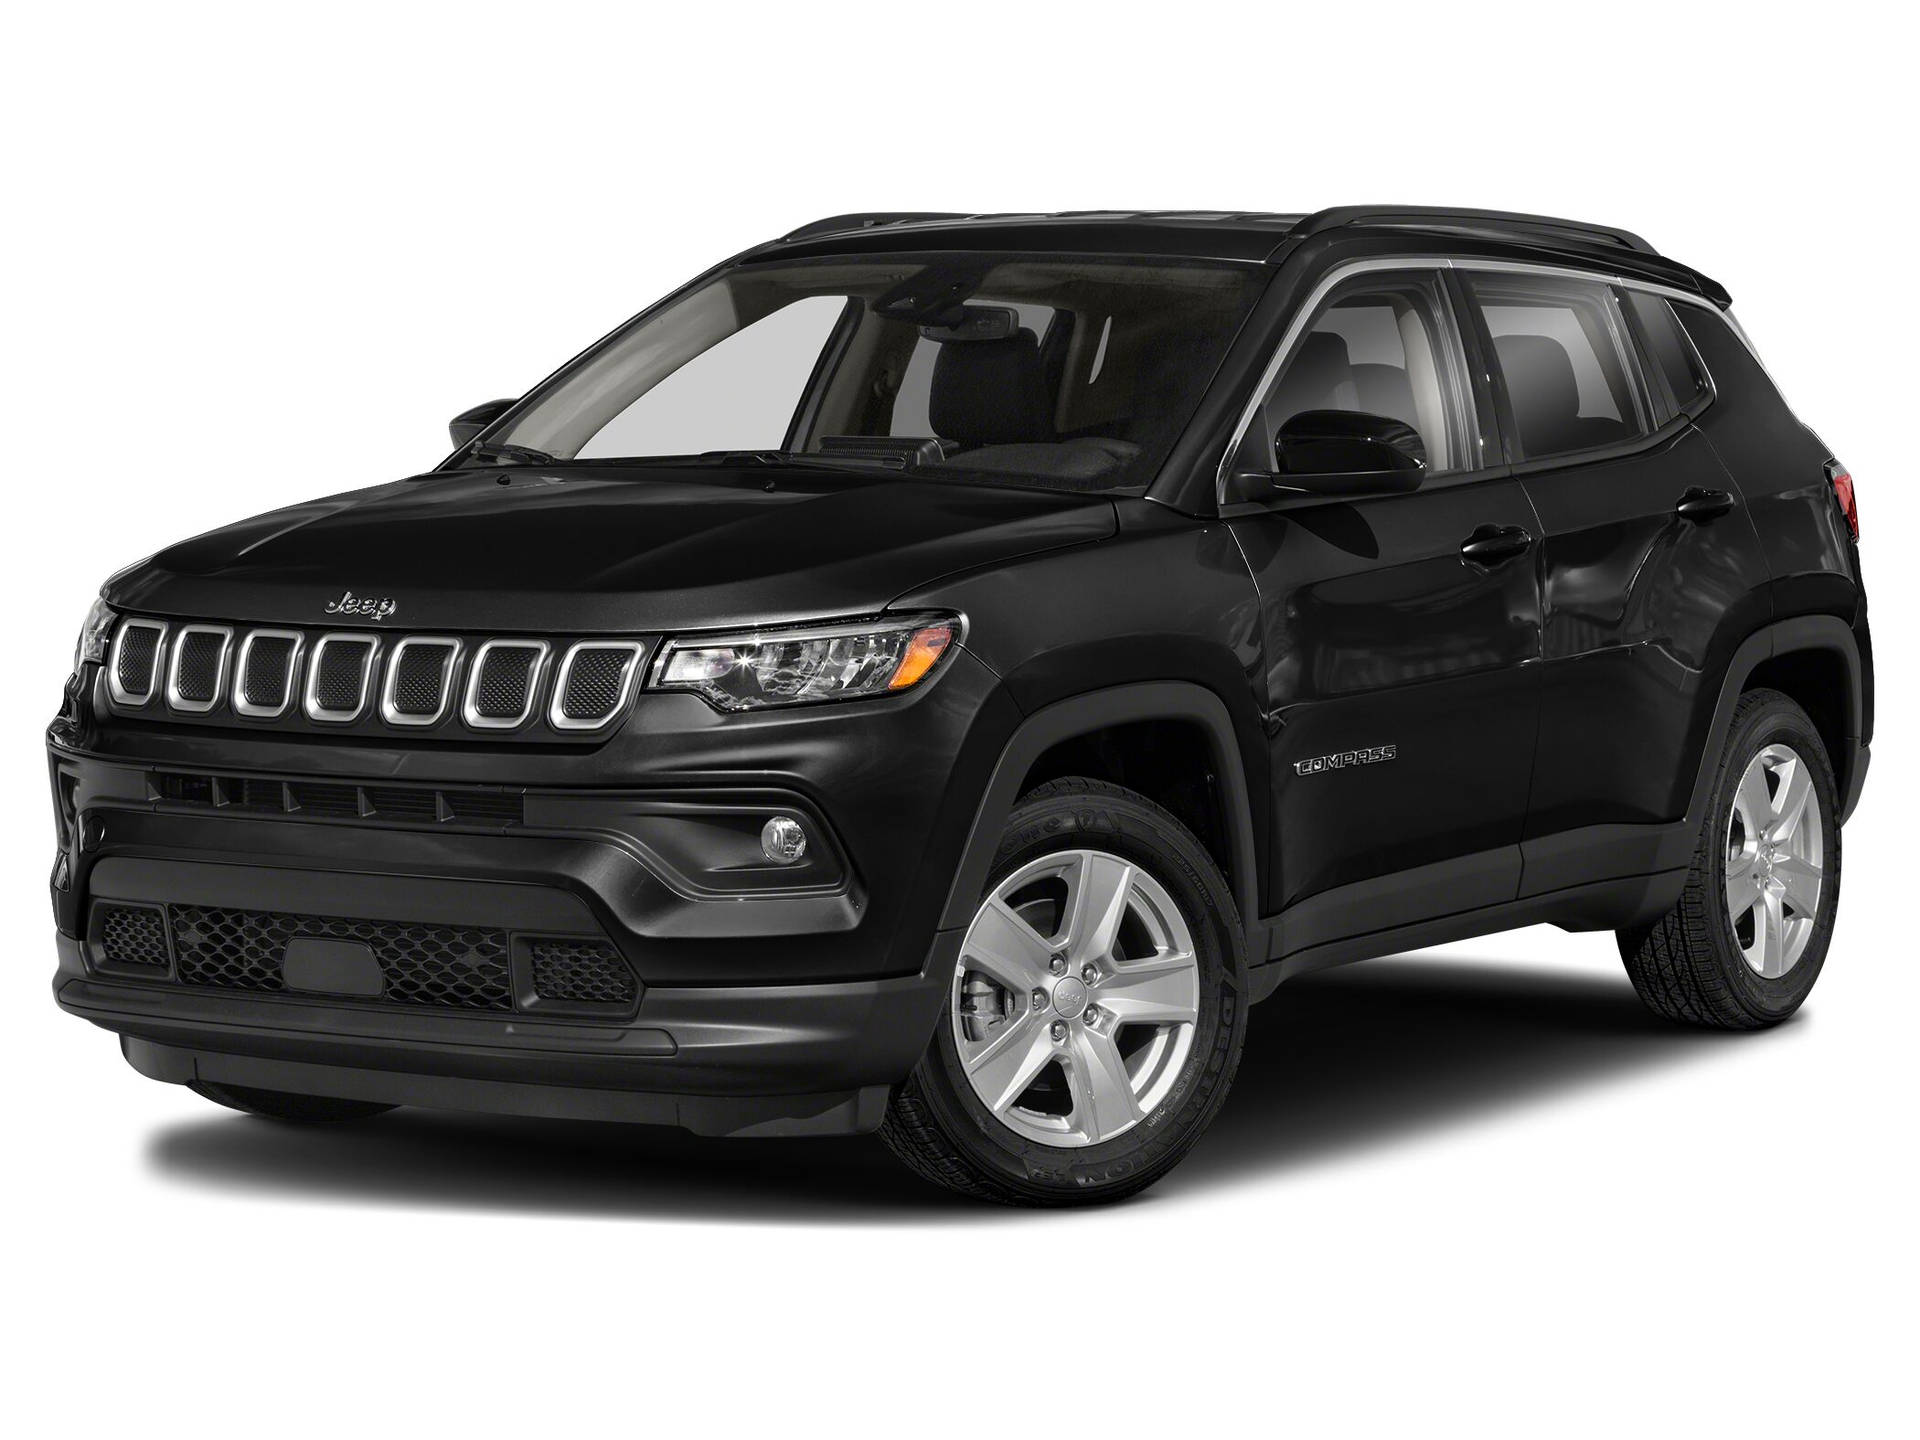 Jeep Compass Black Aesthetic On White Wallpaper